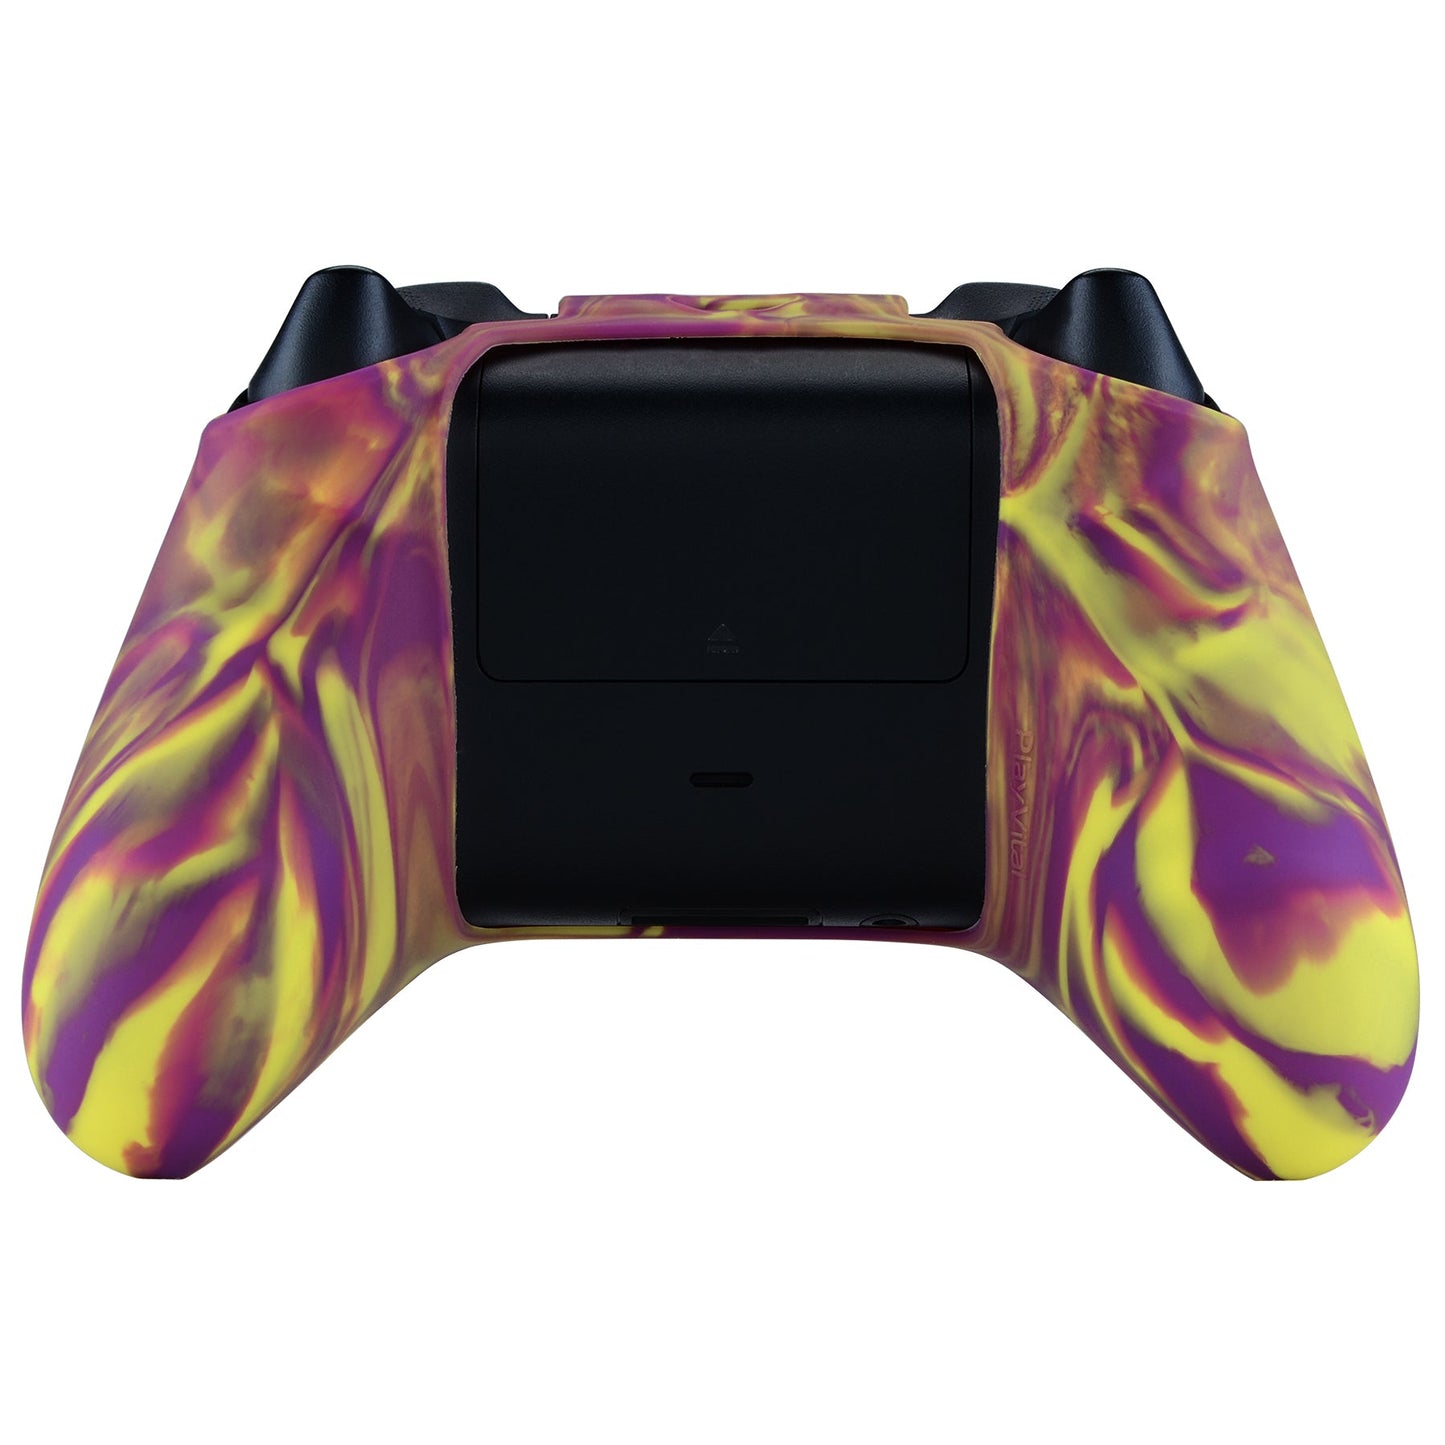 PlayVital Two Tone Purple & Yellow Camouflage Anti-Slip Silicone Cover Skin for Xbox Series X Controller, Soft Rubber Case Protector for Xbox Series S Controller with Black Thumb Grip Caps - BLX3013 PlayVital